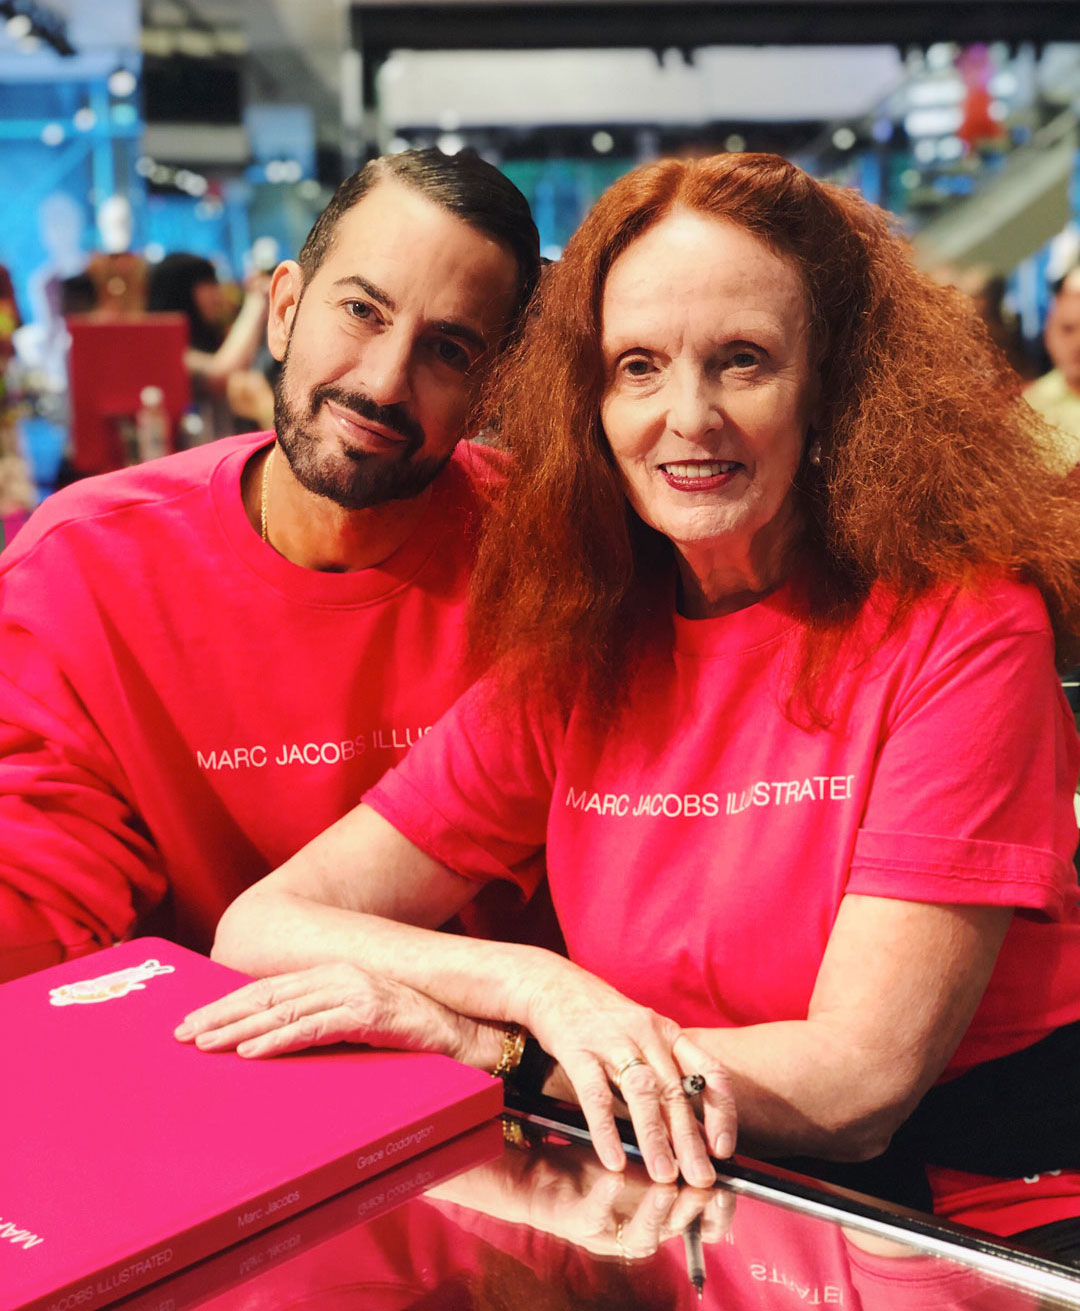 Marc Jacobs and Grace Coddington at their New York signing. Photograph by Jim Shi, courtesy of his Instagram @jshi809